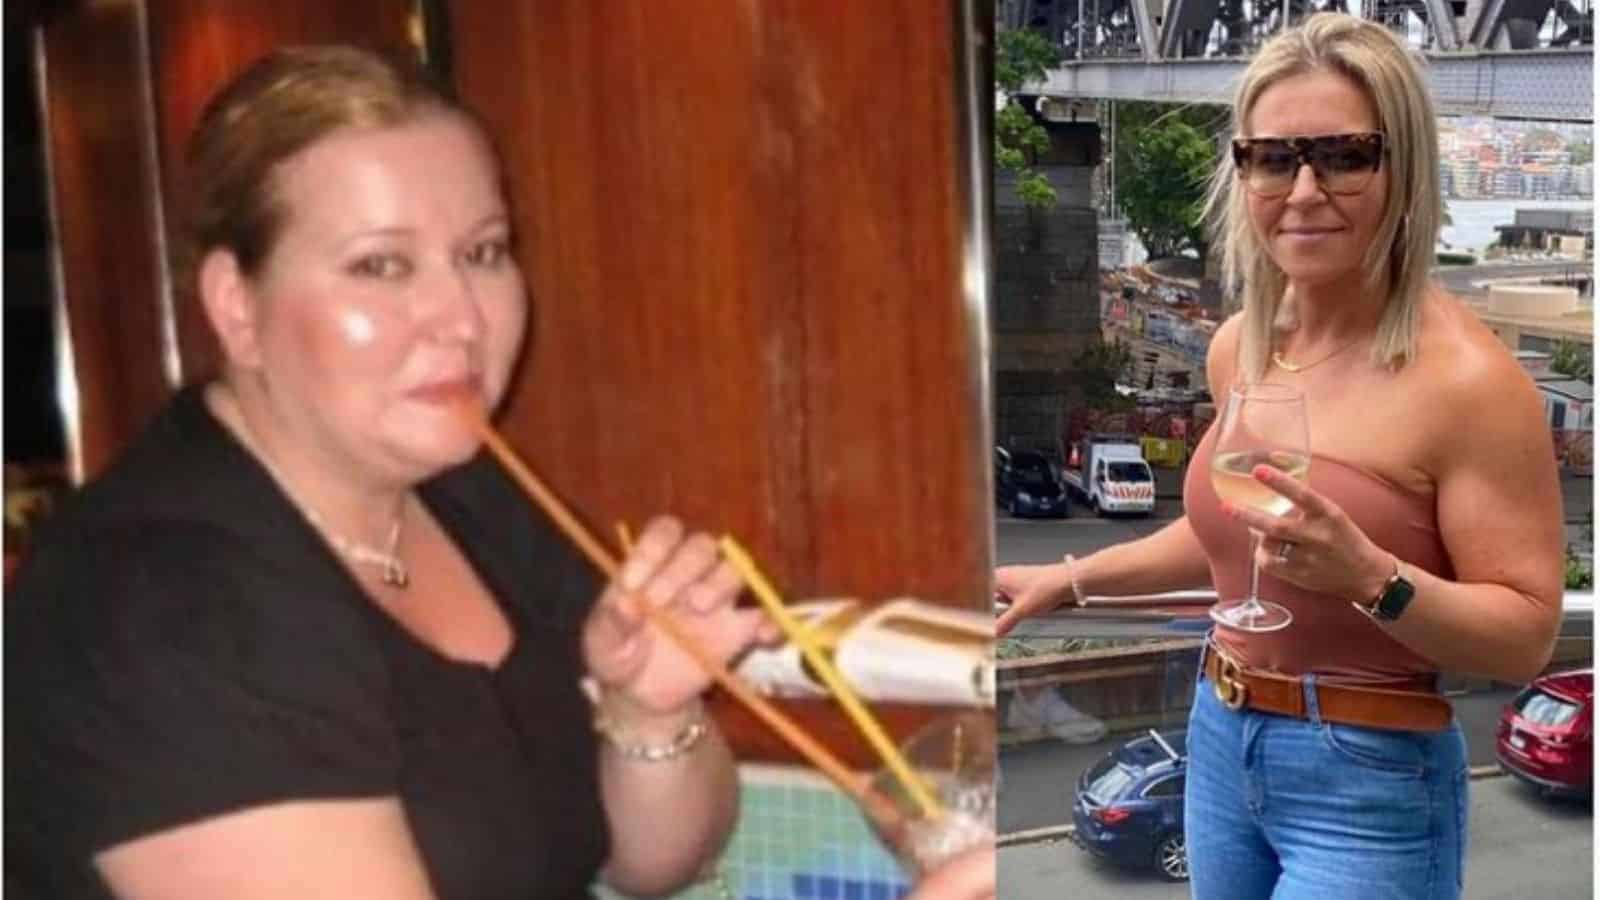 Woman Makes Stunning Transformation, Calls it “Fat to Fit”